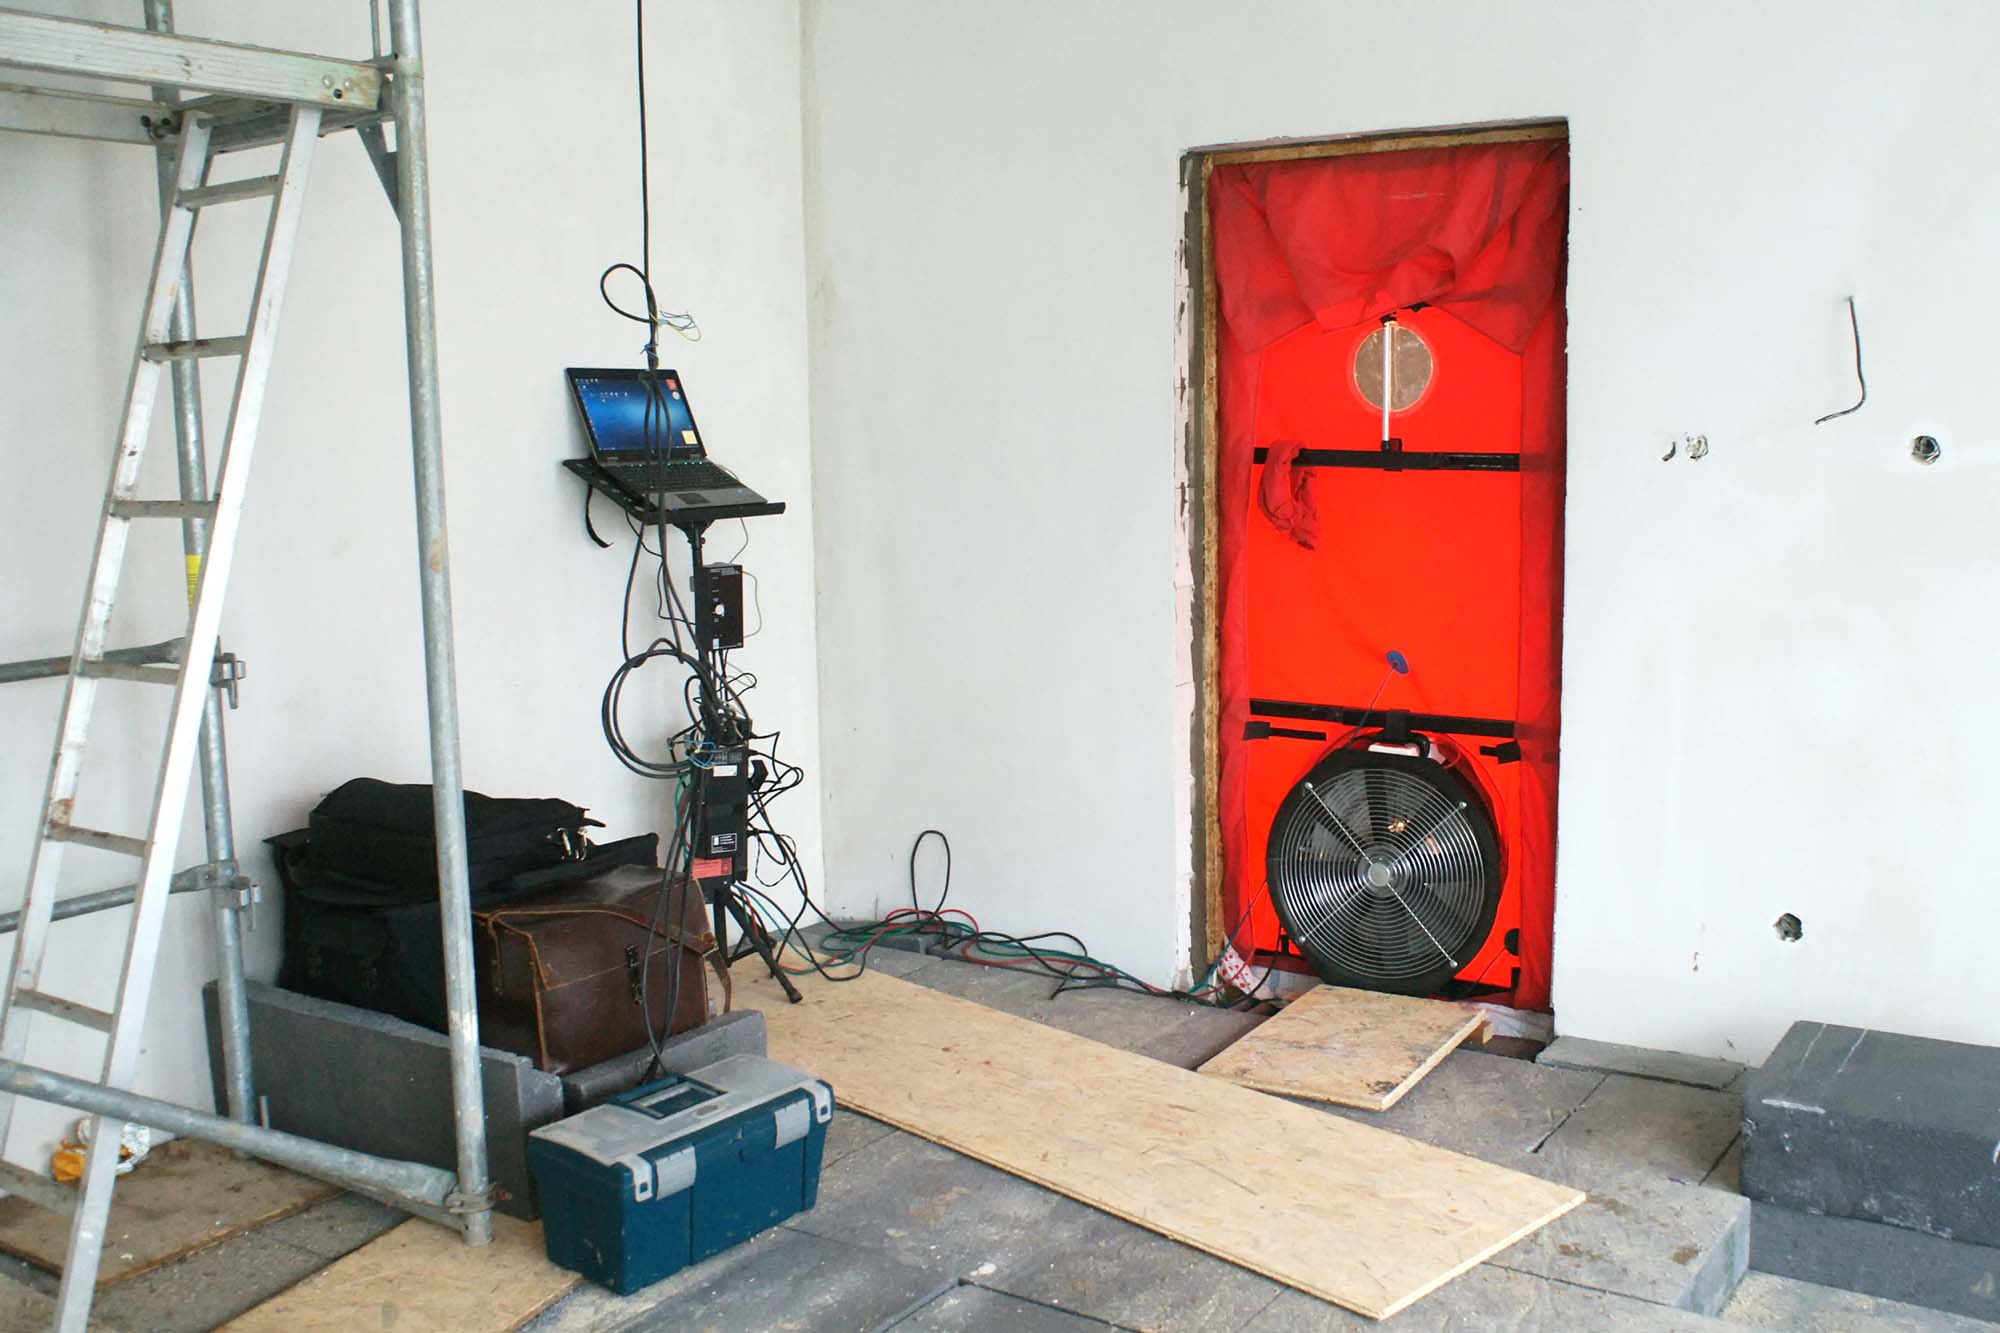 Testing the house airtightness by the blower door test